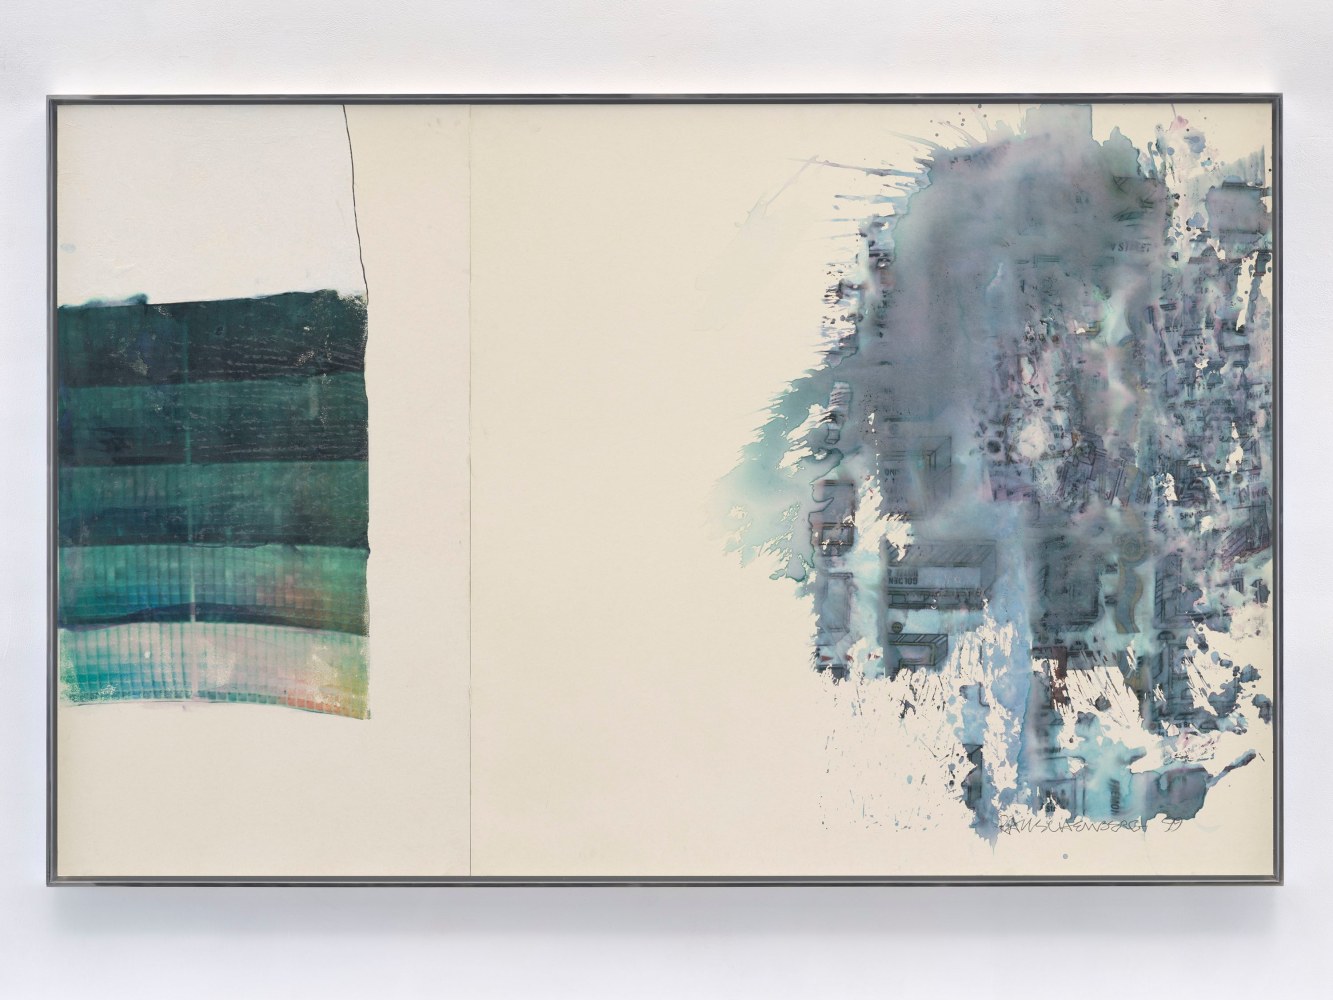 S (Apogamy Pods)

1999

inkjet pigment transfer, acrylic, and graphite on polylaminate

61 x 95&amp;nbsp;&amp;frac14; inches (154.9 x 241.9 cm)

&amp;copy; 2022 The Robert Rauschenberg Foundation, Licensed by VAGA at Artists Rights Society (ARS), New York. Photo: Ron Amstutz, courtesy of The Robert Rauschenberg Foundation and Mnuchin Gallery, New York.